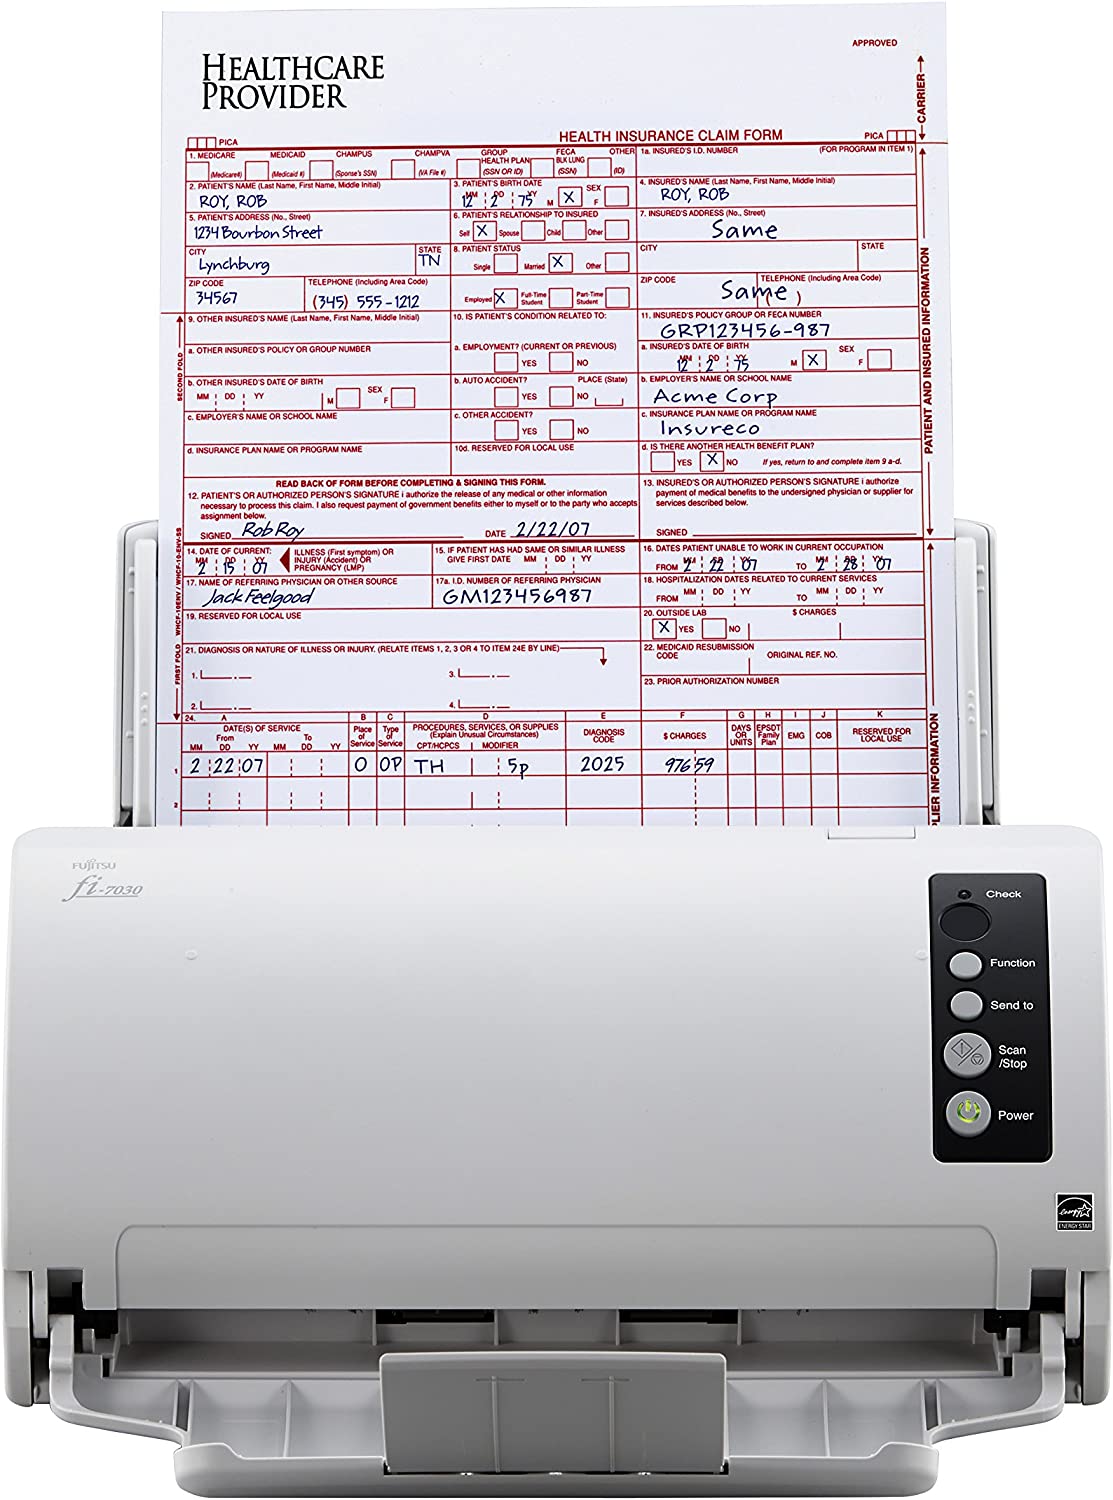 Fujitsu fi-7030 Value-Priced Front Office Color Duplex Document Scanner with Auto Document Feeder (ADF) fi-7030 Scanner (27 ppm)